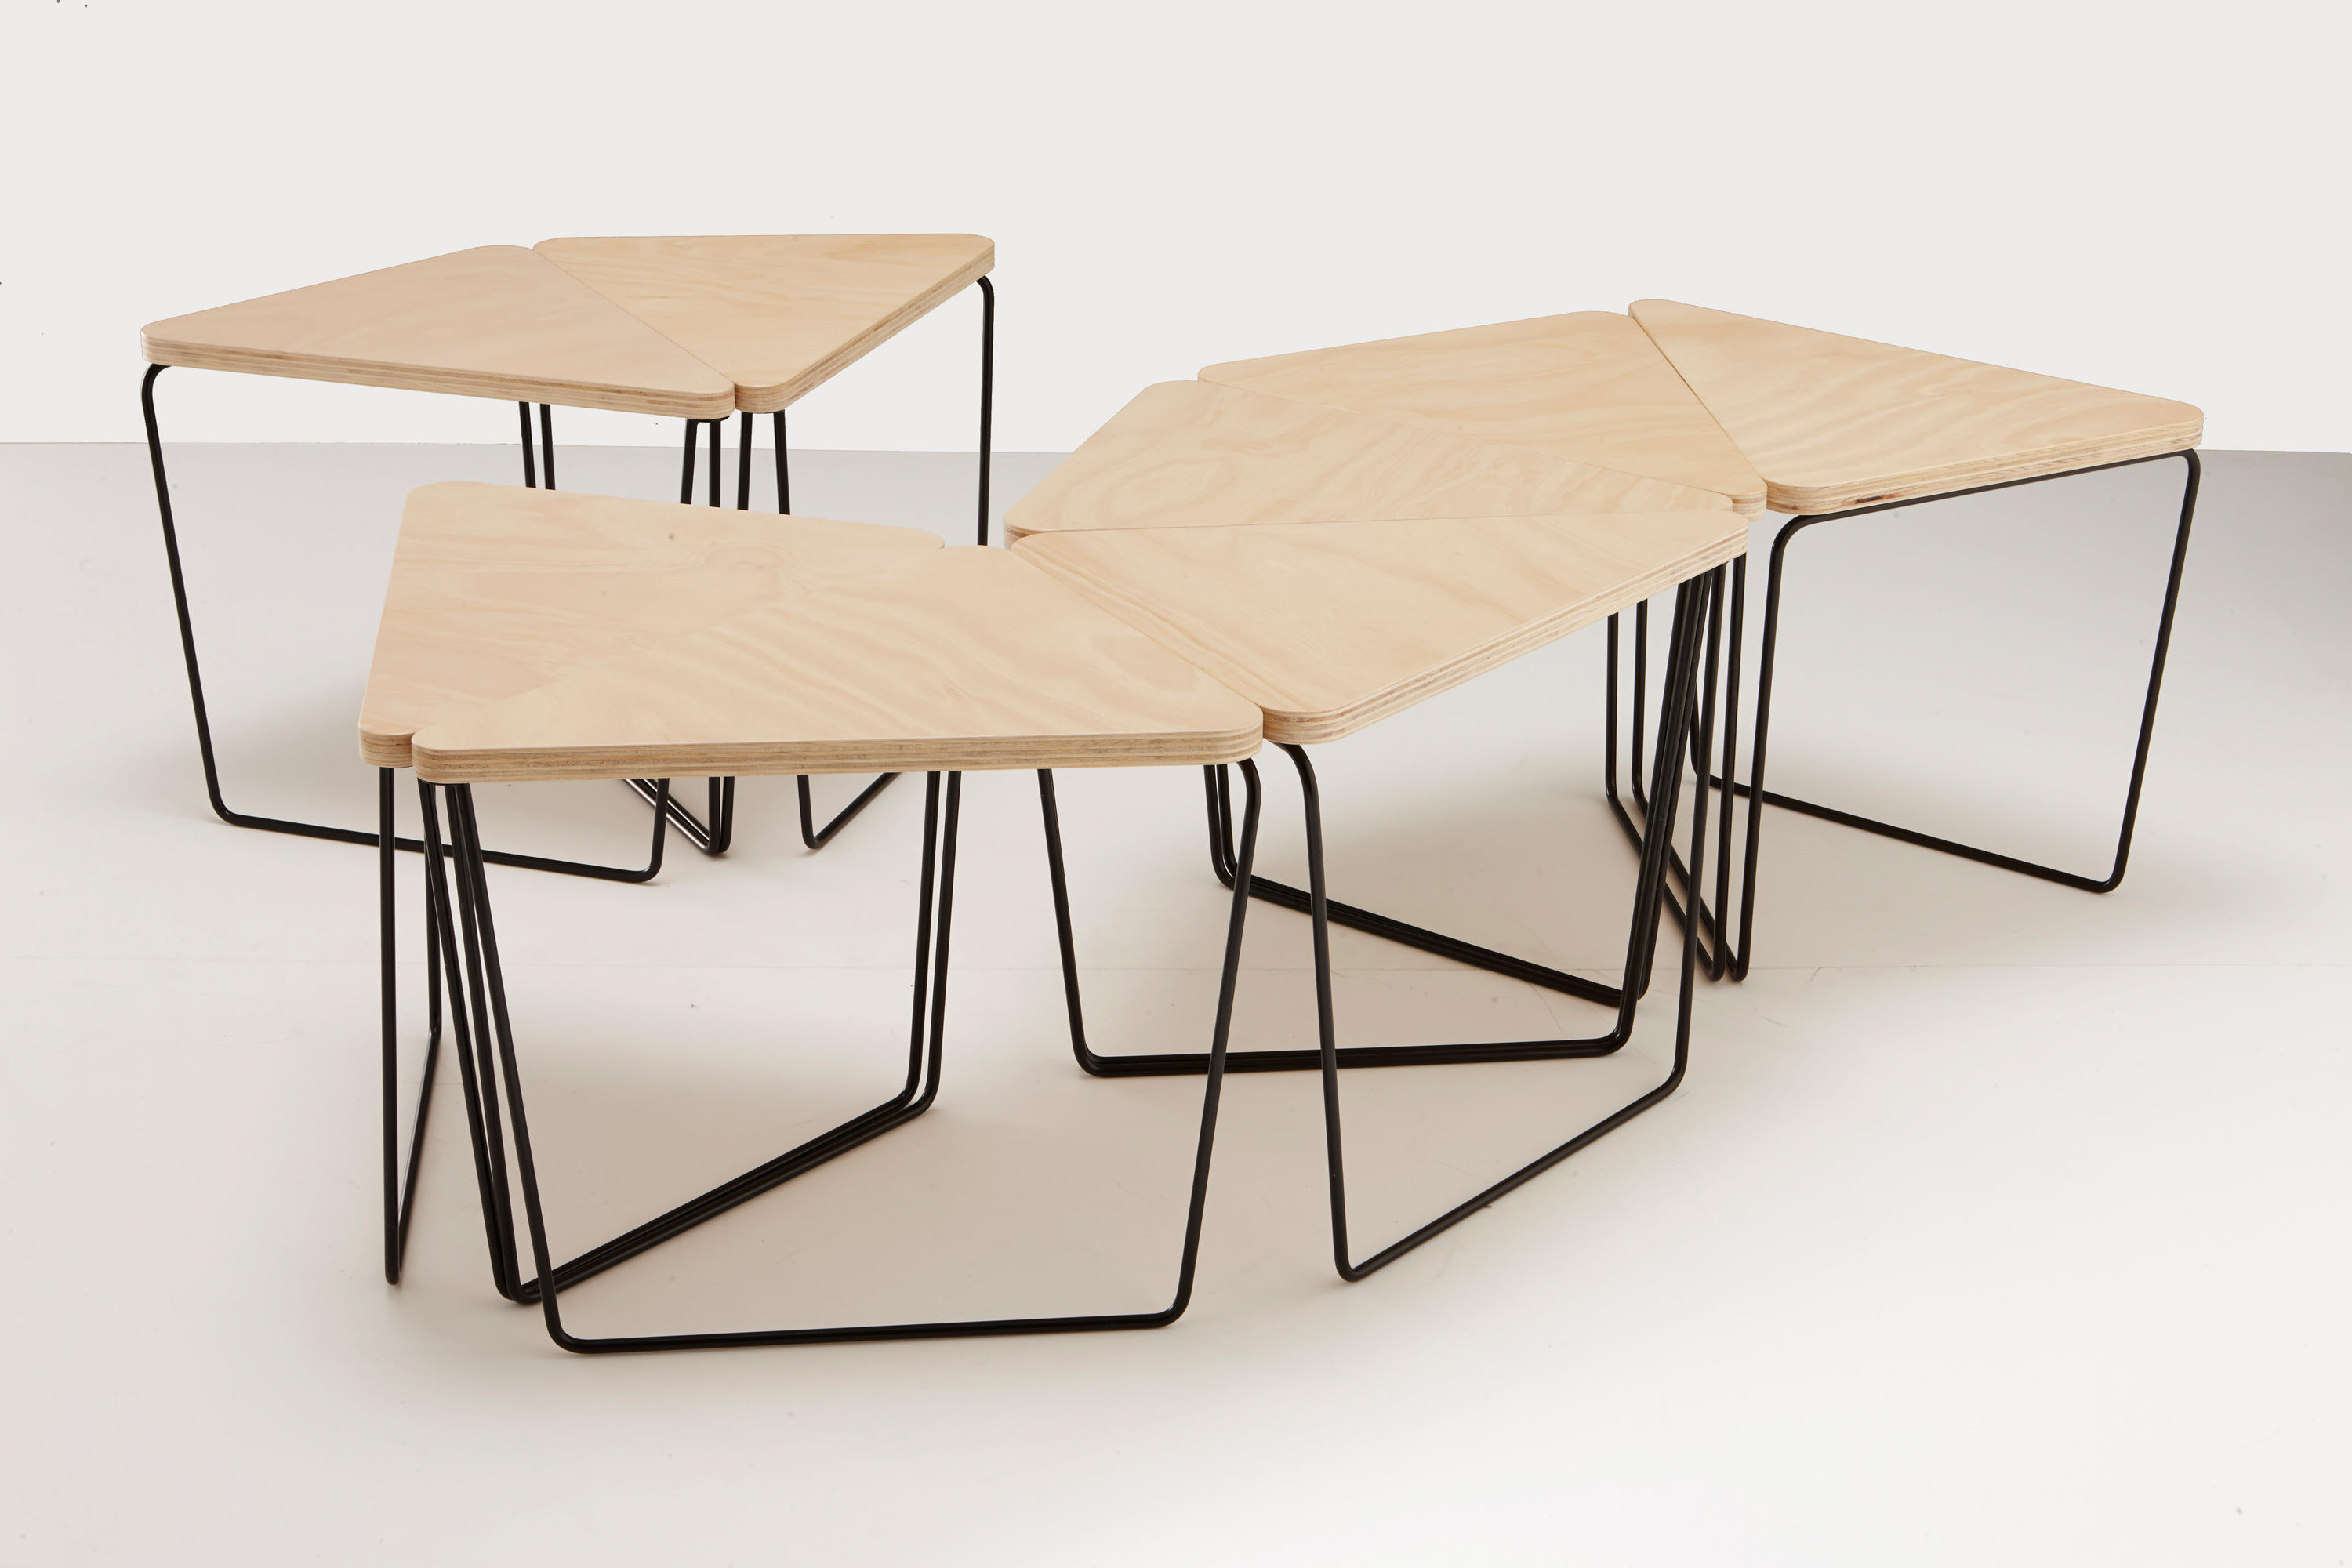 FRACTAL TABLE - Coffee tables from DesignByThem | Architonic